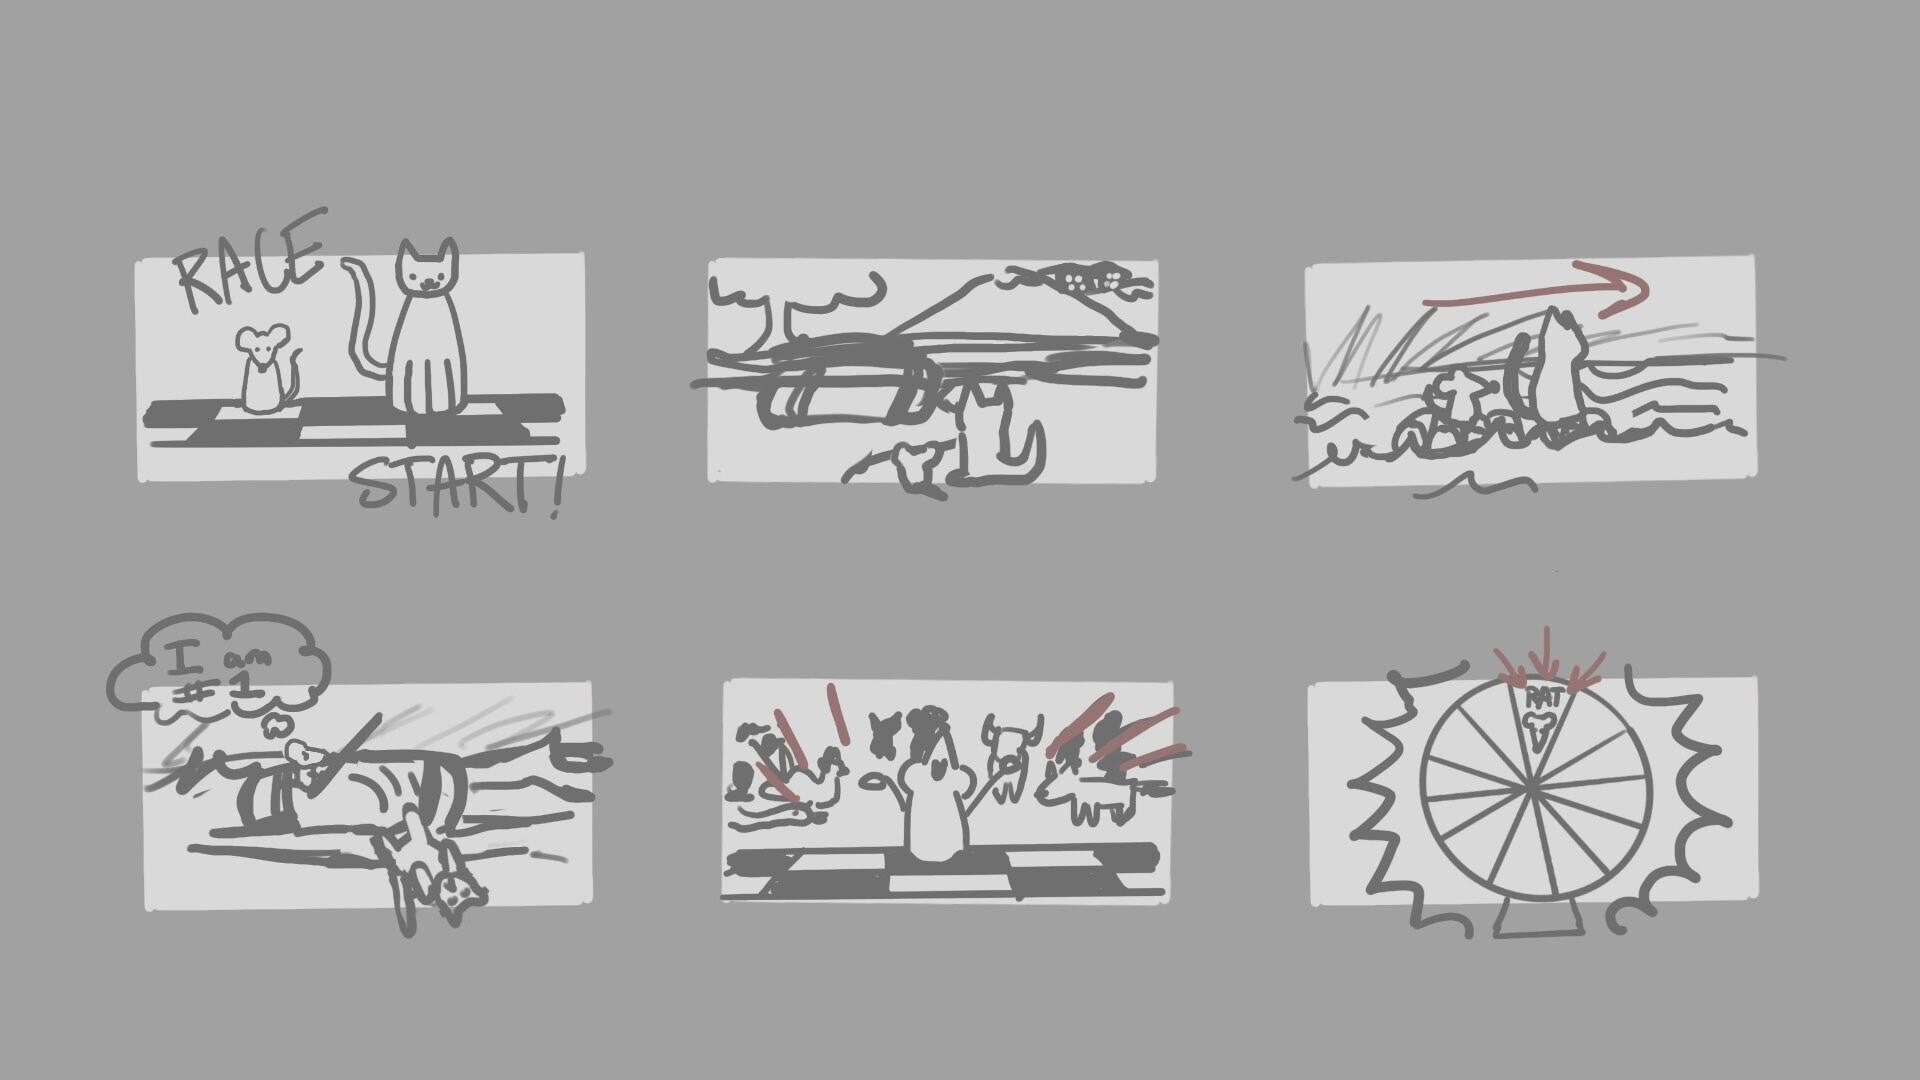 Storyboard of Cat and Rat Zodiac interactions